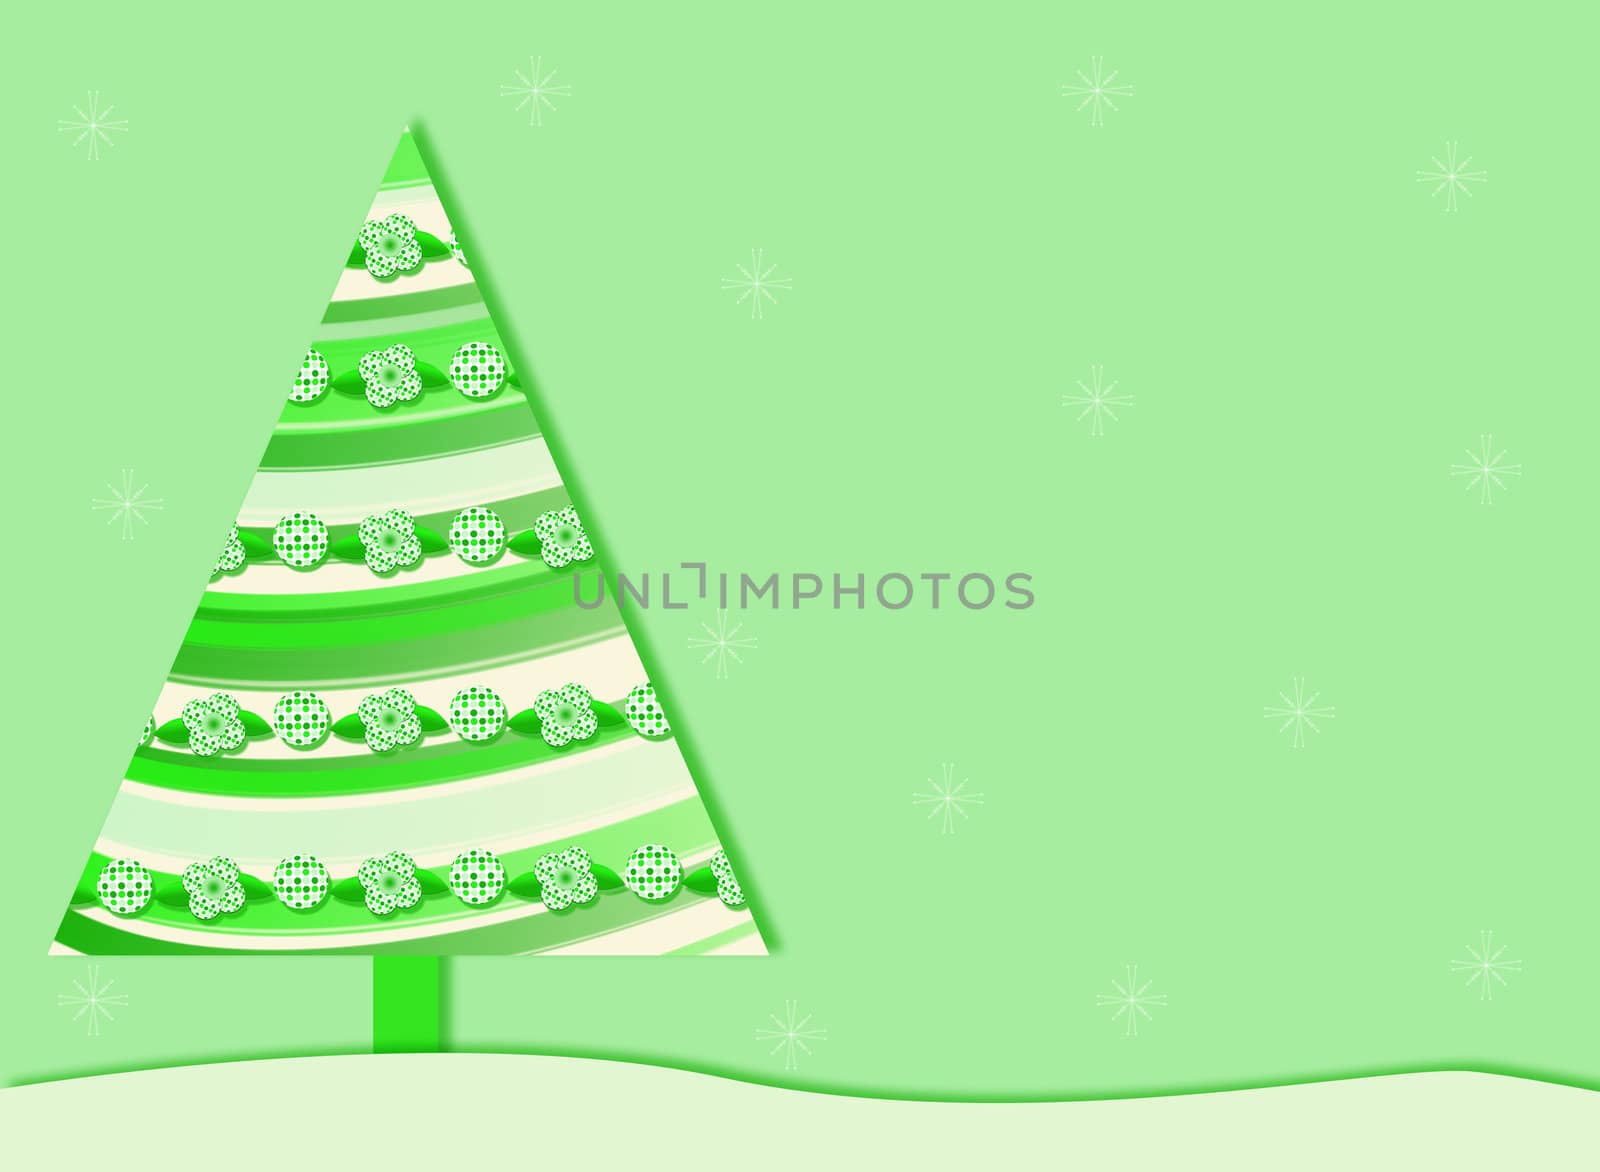 A green Christmas background with a retro Christmas tree and snowflakes